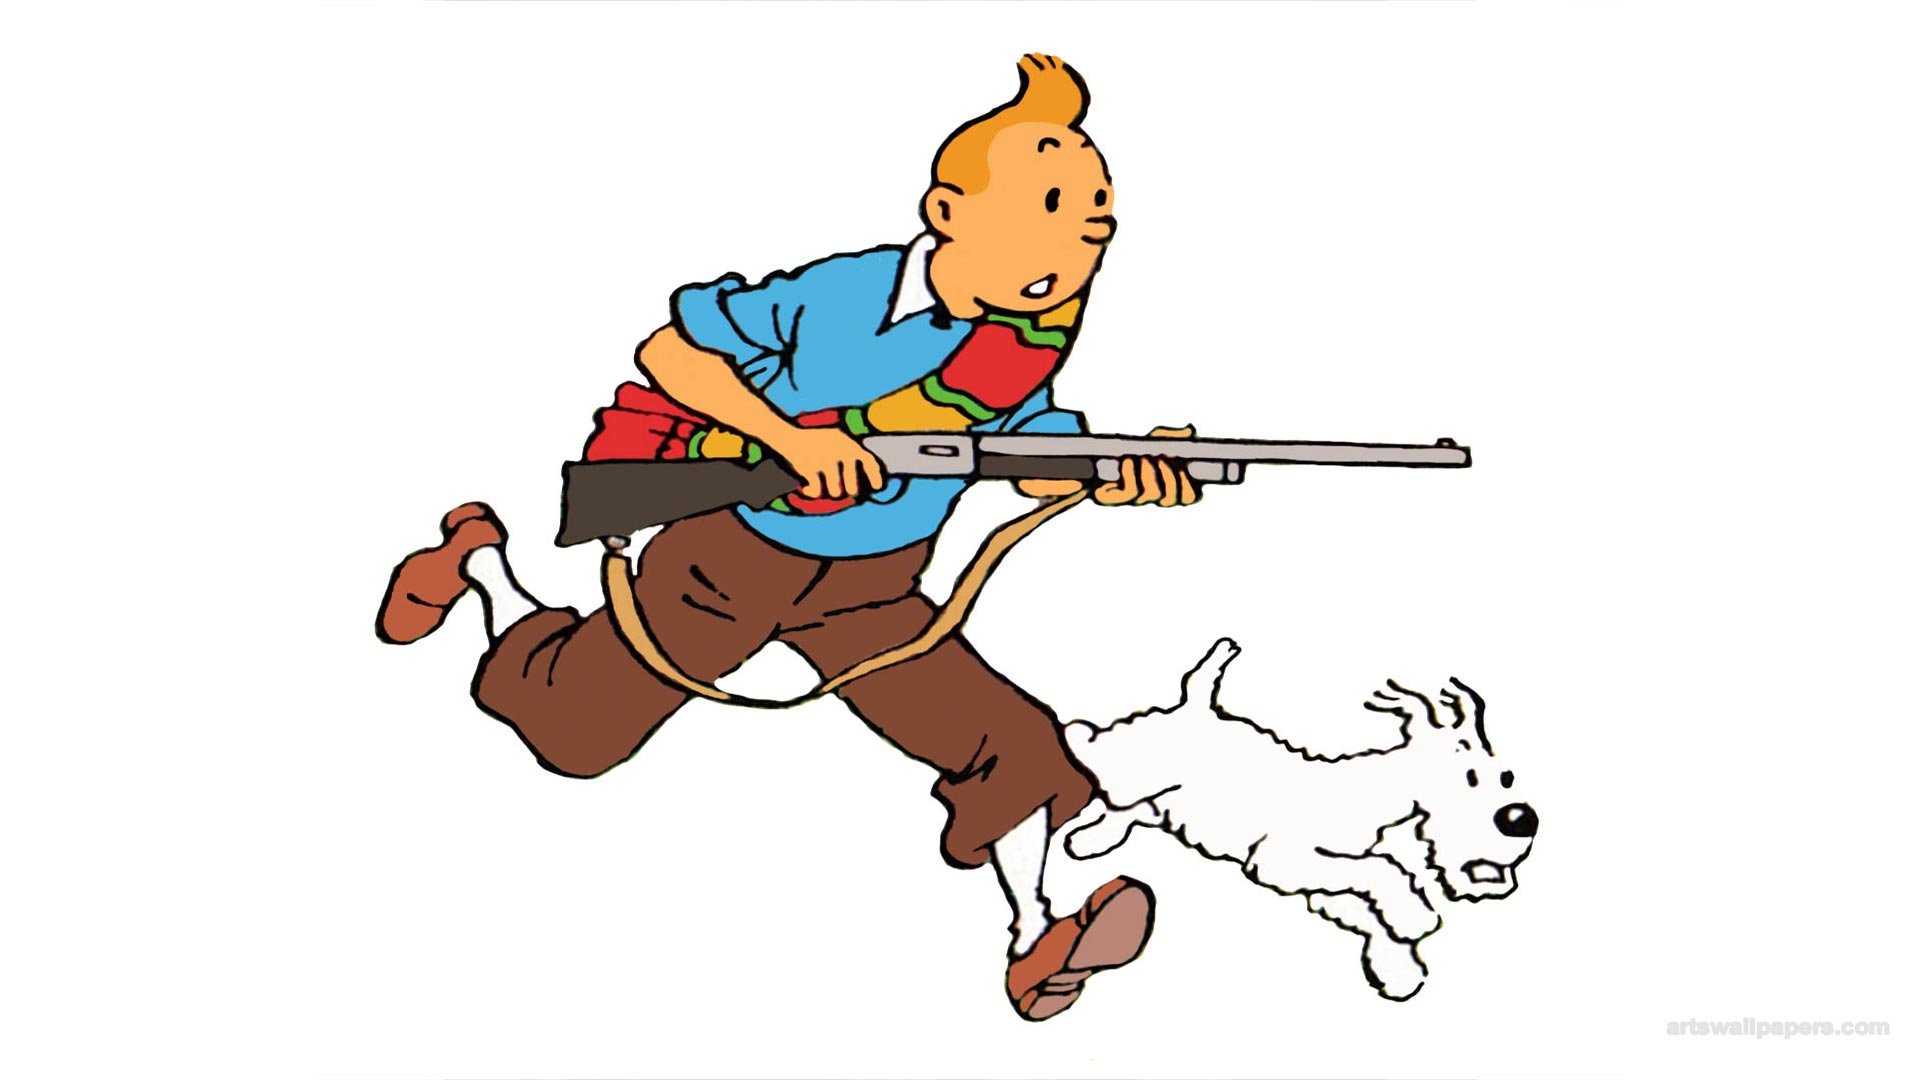 Tintin | Widescreen and Full HD Wallpapers